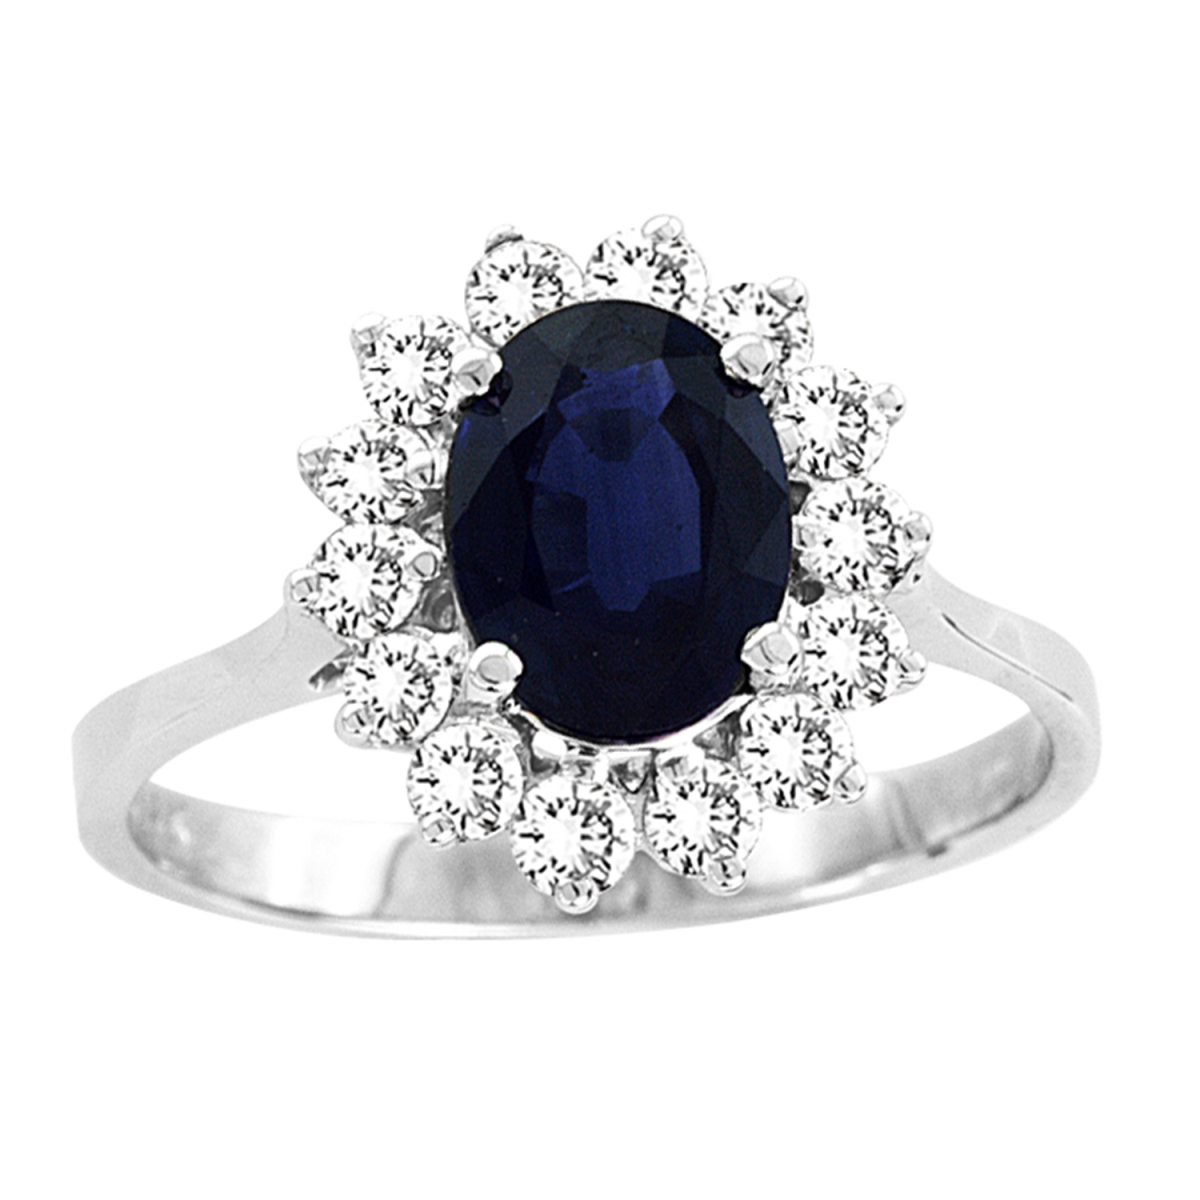 Picture of Louis Creations R1548SD-8.5 14K Gold Royal Collection 1.75 CTTW 8 x 6 mm 1.35 Carat Oval Sapphire Center Stone Natural Sapphire & Diamond Ring - Size 8.5